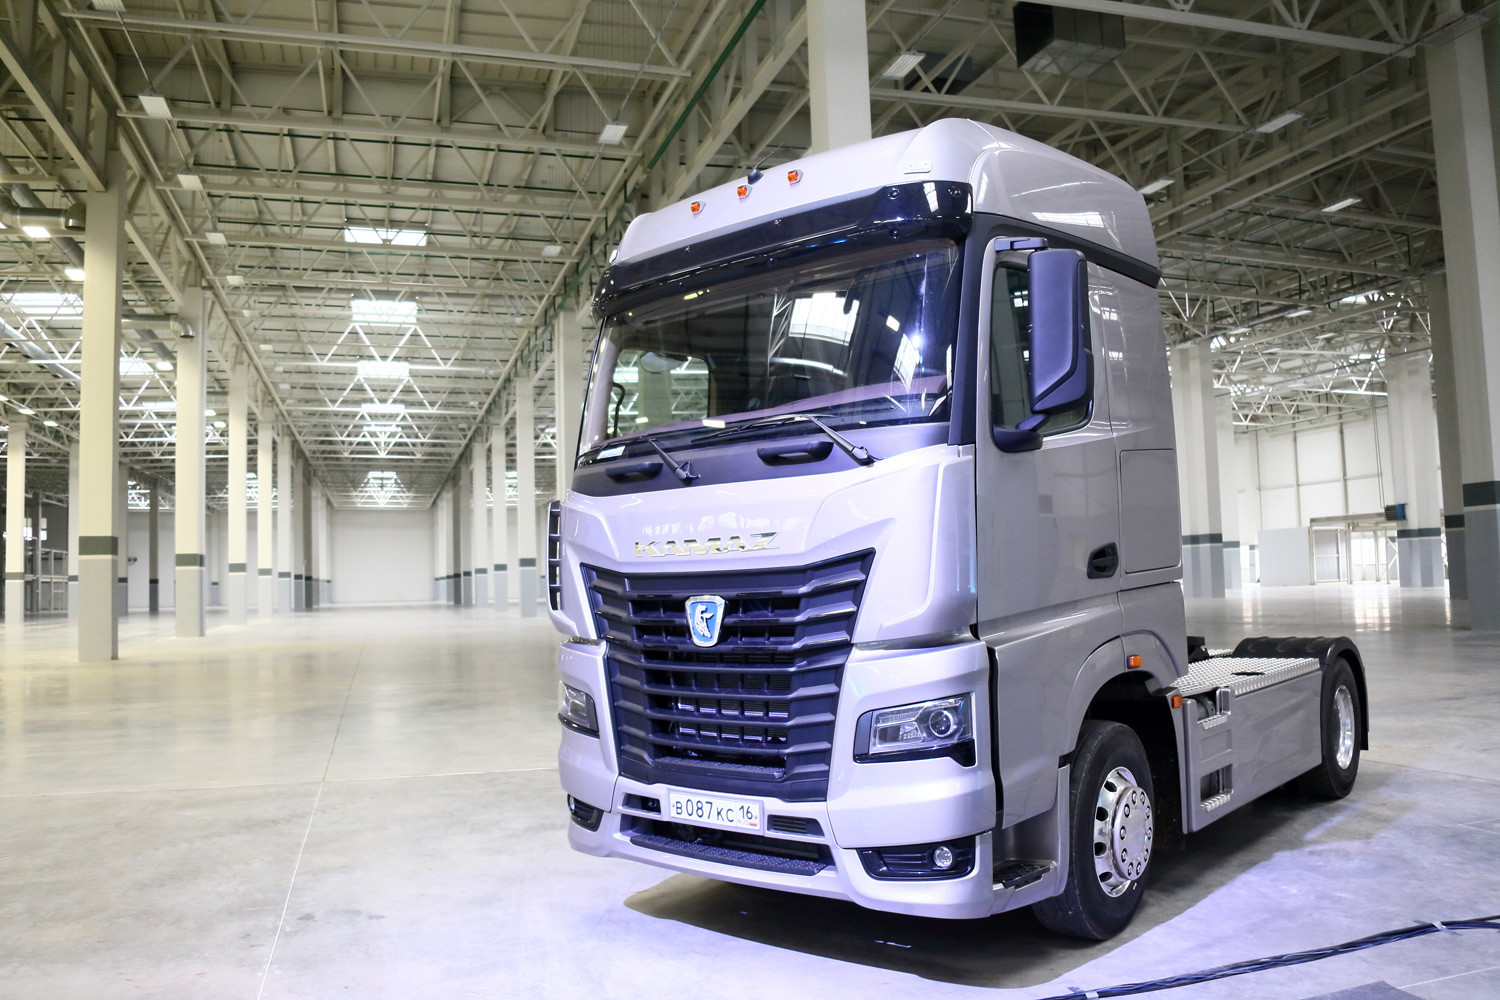 12 trucks that are the pride of the Russian automobile industry - Russia Beyond